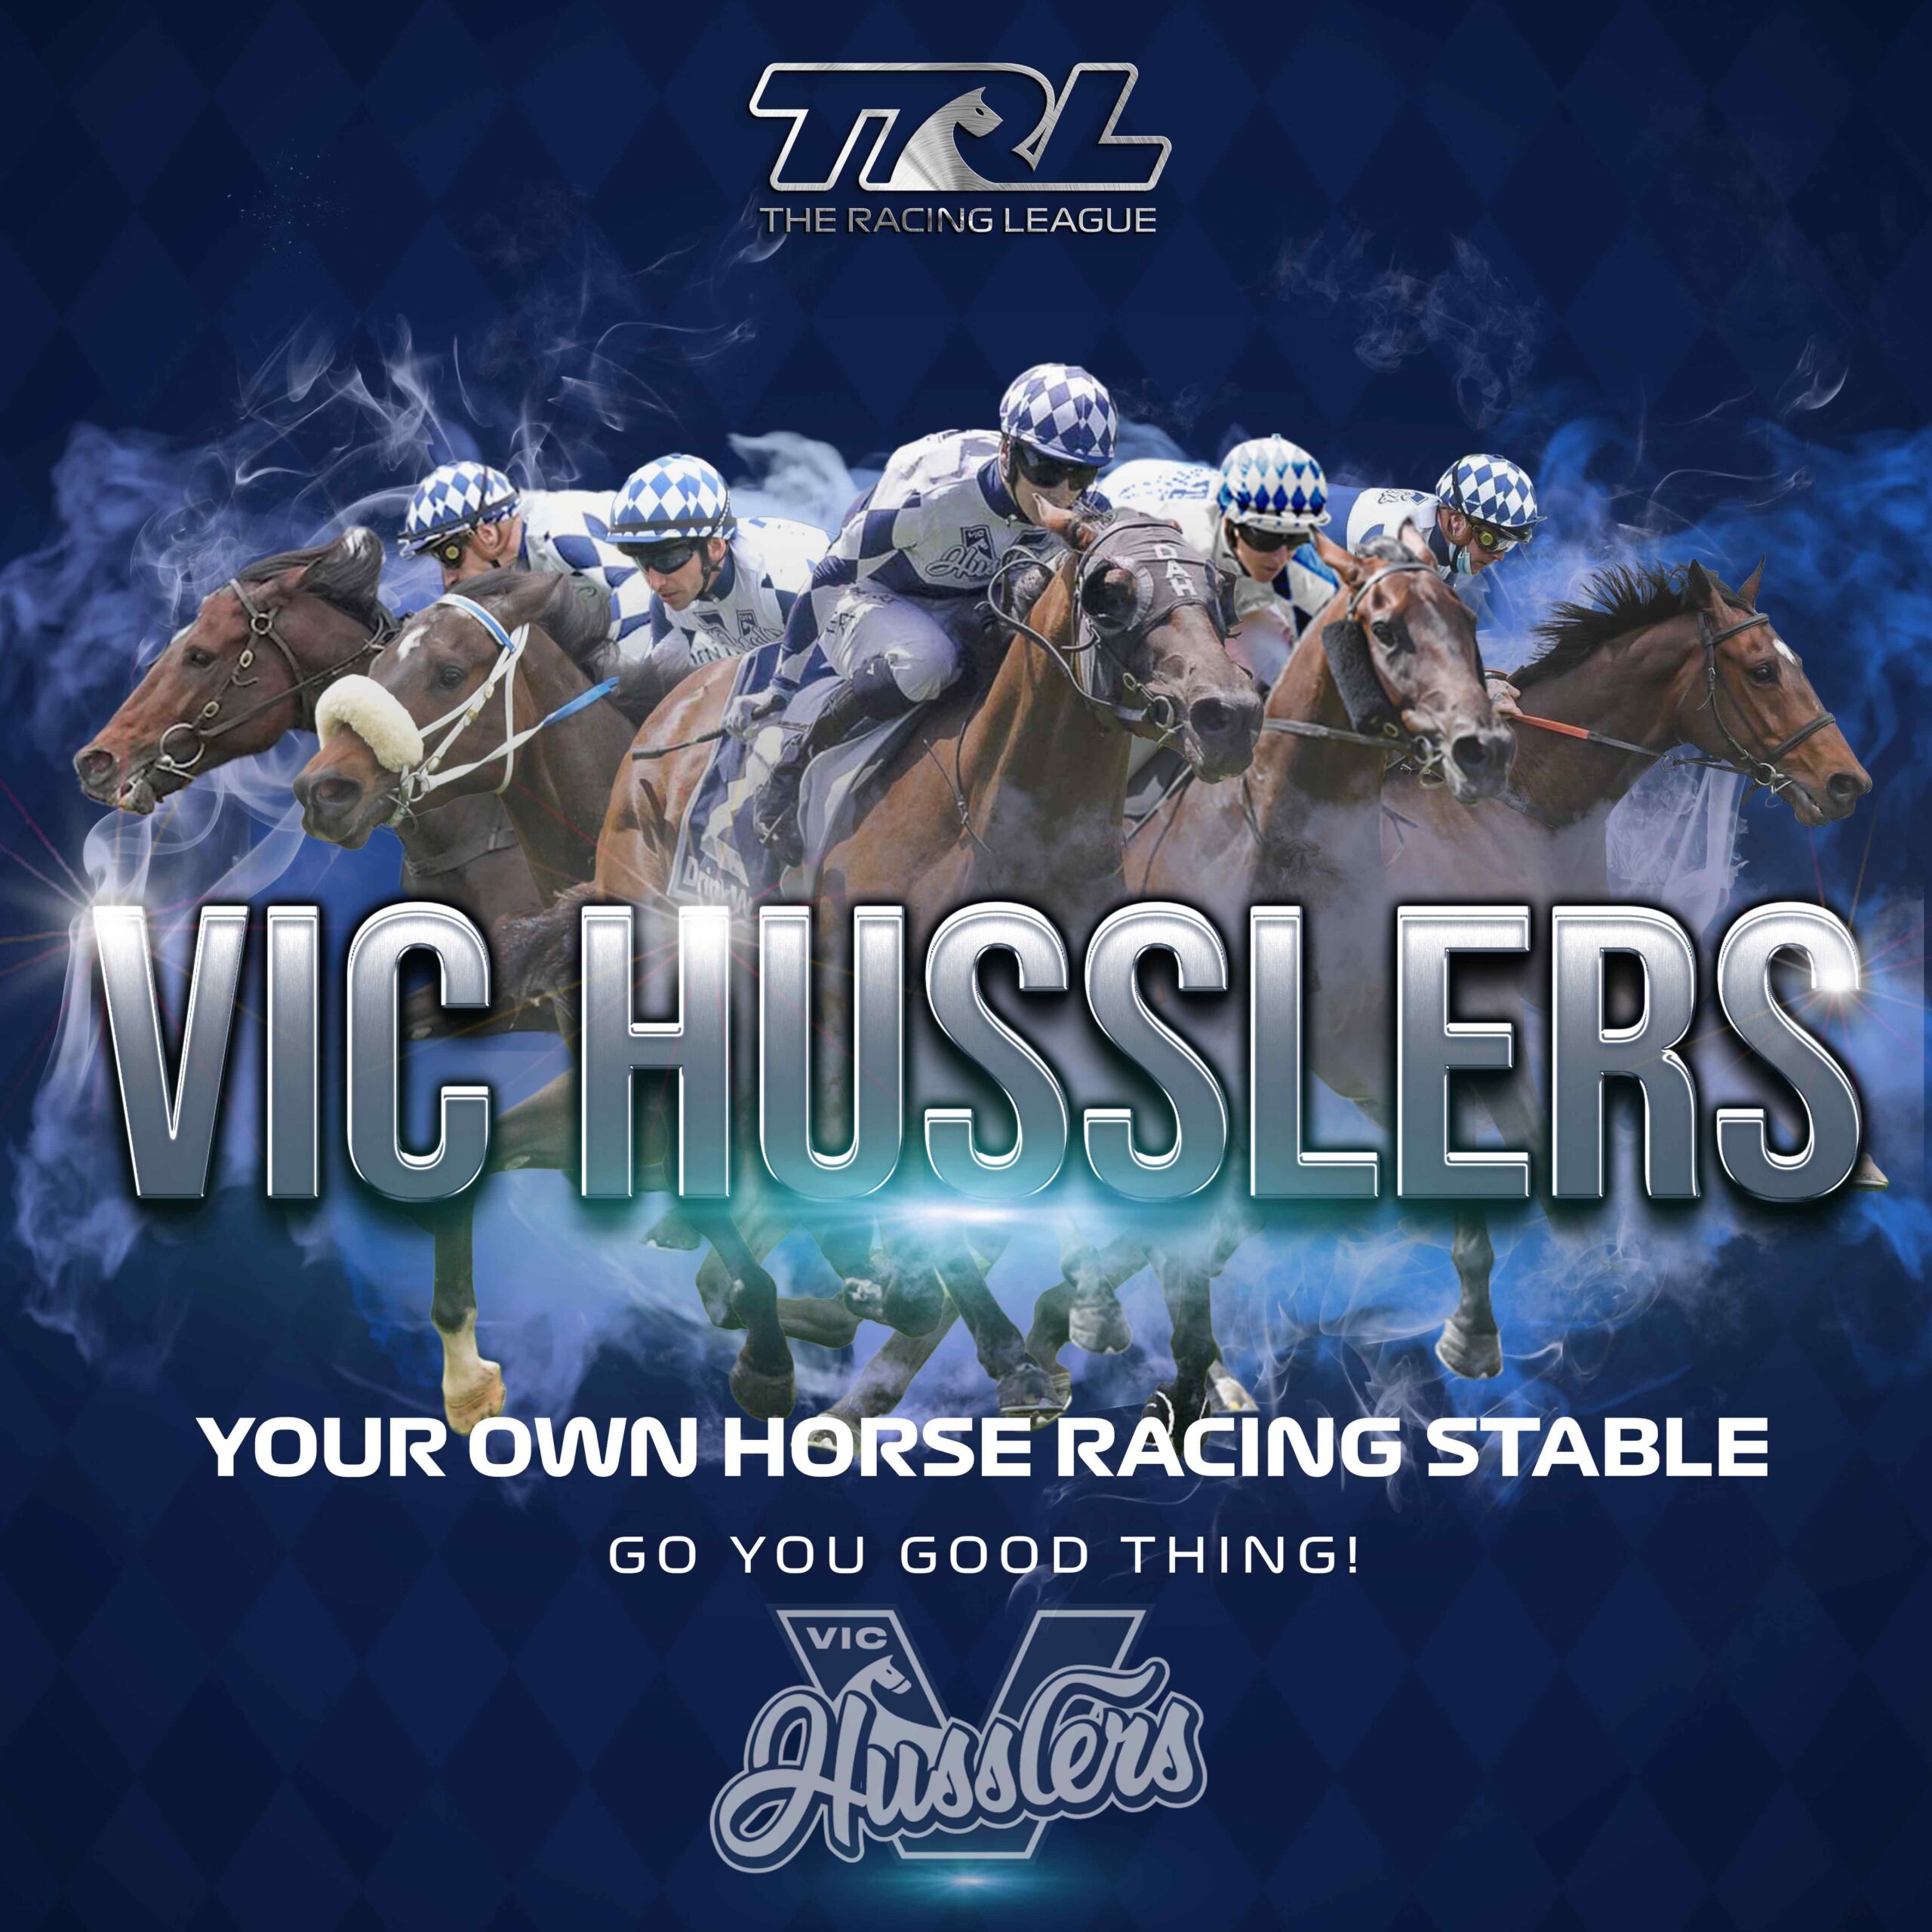 The VIC Husslers racing team competing in The Racing League